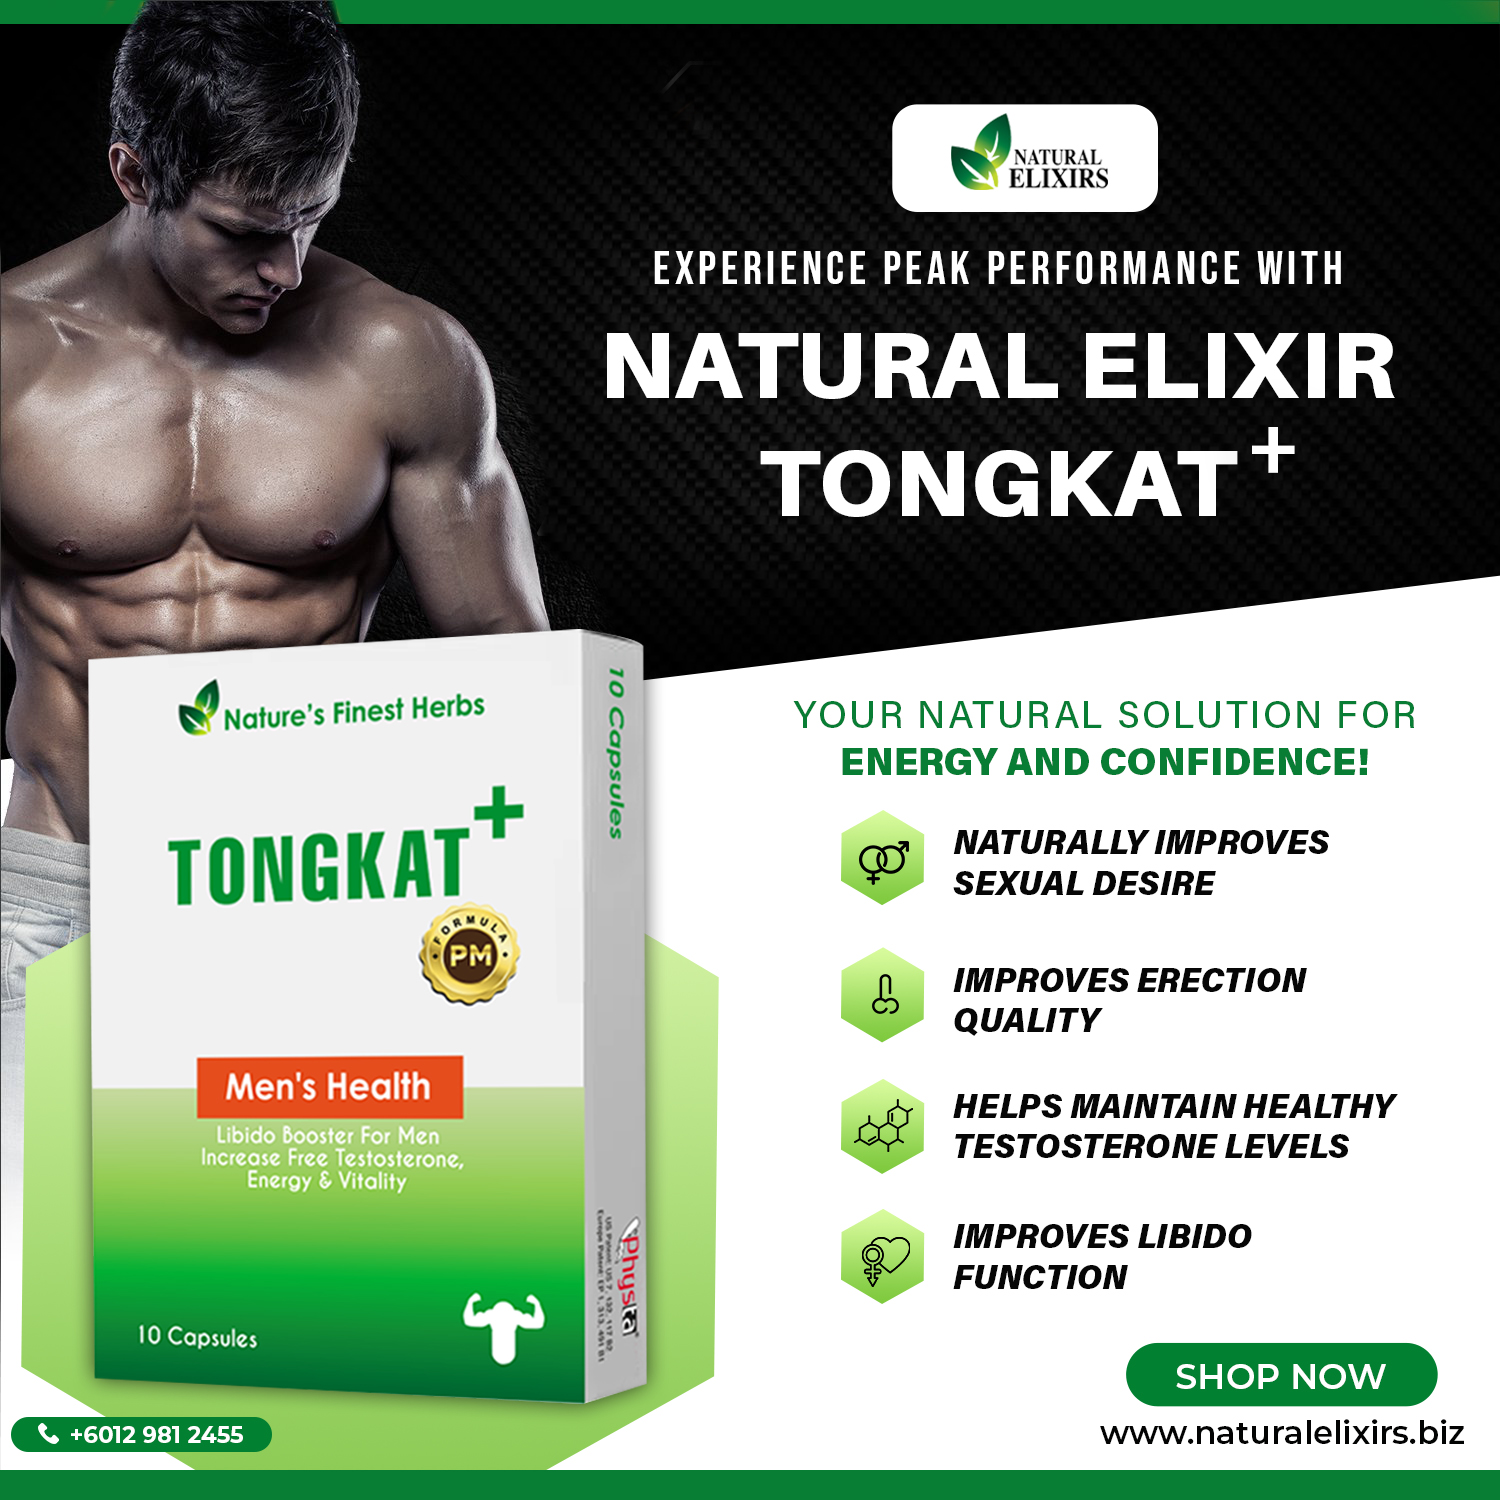 best herbal supplement  Explore Natural Elixirs' best herbal supplement formulas TONGKAT + at
https://naturalelixirs.biz/product-category/men/ by Natural Elixirs